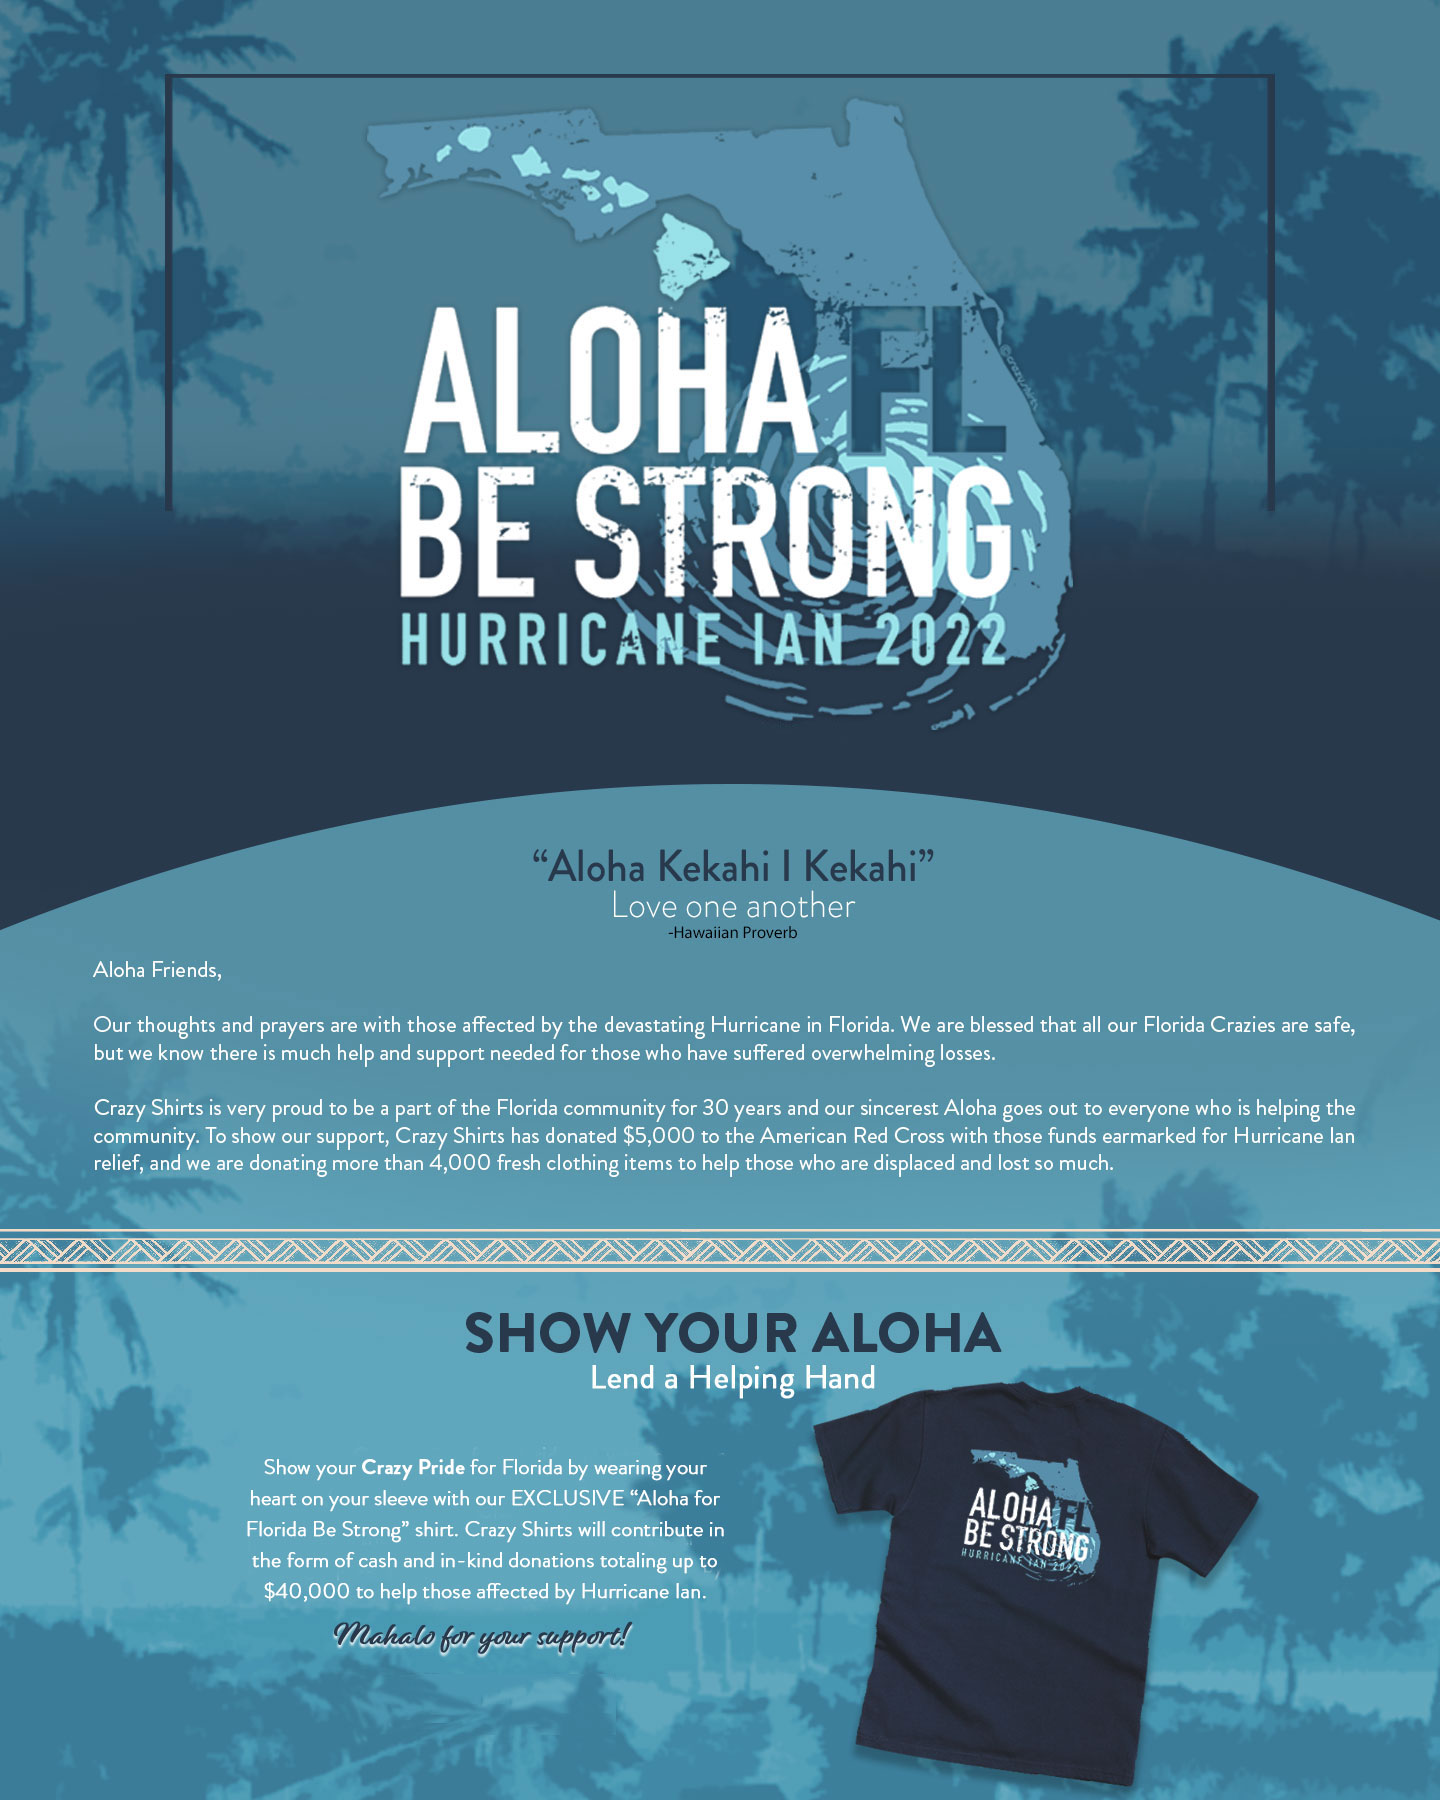 Aloha Kekahi I Kekahi
Love One Another
Hawaiian Proverb
 
Aloha Friends,
 
Our thoughts and prayers are with those affected by the devastating Hurricane in Florida. We are blessed that all our Florida Crazies are safe, but we know there is much help and support needed for those who have suffered overwhelming losses.
Crazy Shirts is very proud to be a part of the Florida community for 30 years and our sincerest Aloha goes out to everyone who is helping the community. To show our support, Crazy Shirts has donated $5,000 to the American Red Cross with those funds earmarked for Hurricane Ian relief, and we are donating more than 4,000 fresh clothing items to help those who are displaced and lost so much. 
 
Show Your Aloha
Lend a Helping Hand
 
Show your Crazy Pride for Florida by wearing your heart on your sleeve with our EXCLUSIVE “Aloha for Florida Be Strong” shirt. Crazy Shirts will contribute proceeds in the form of cash and in-kind donations totaling up to $40,000 to help those affected by Hurricane Ian.
 
Mahalo for your support!
 
Shop for A Cause
 
 
THANK YOU
